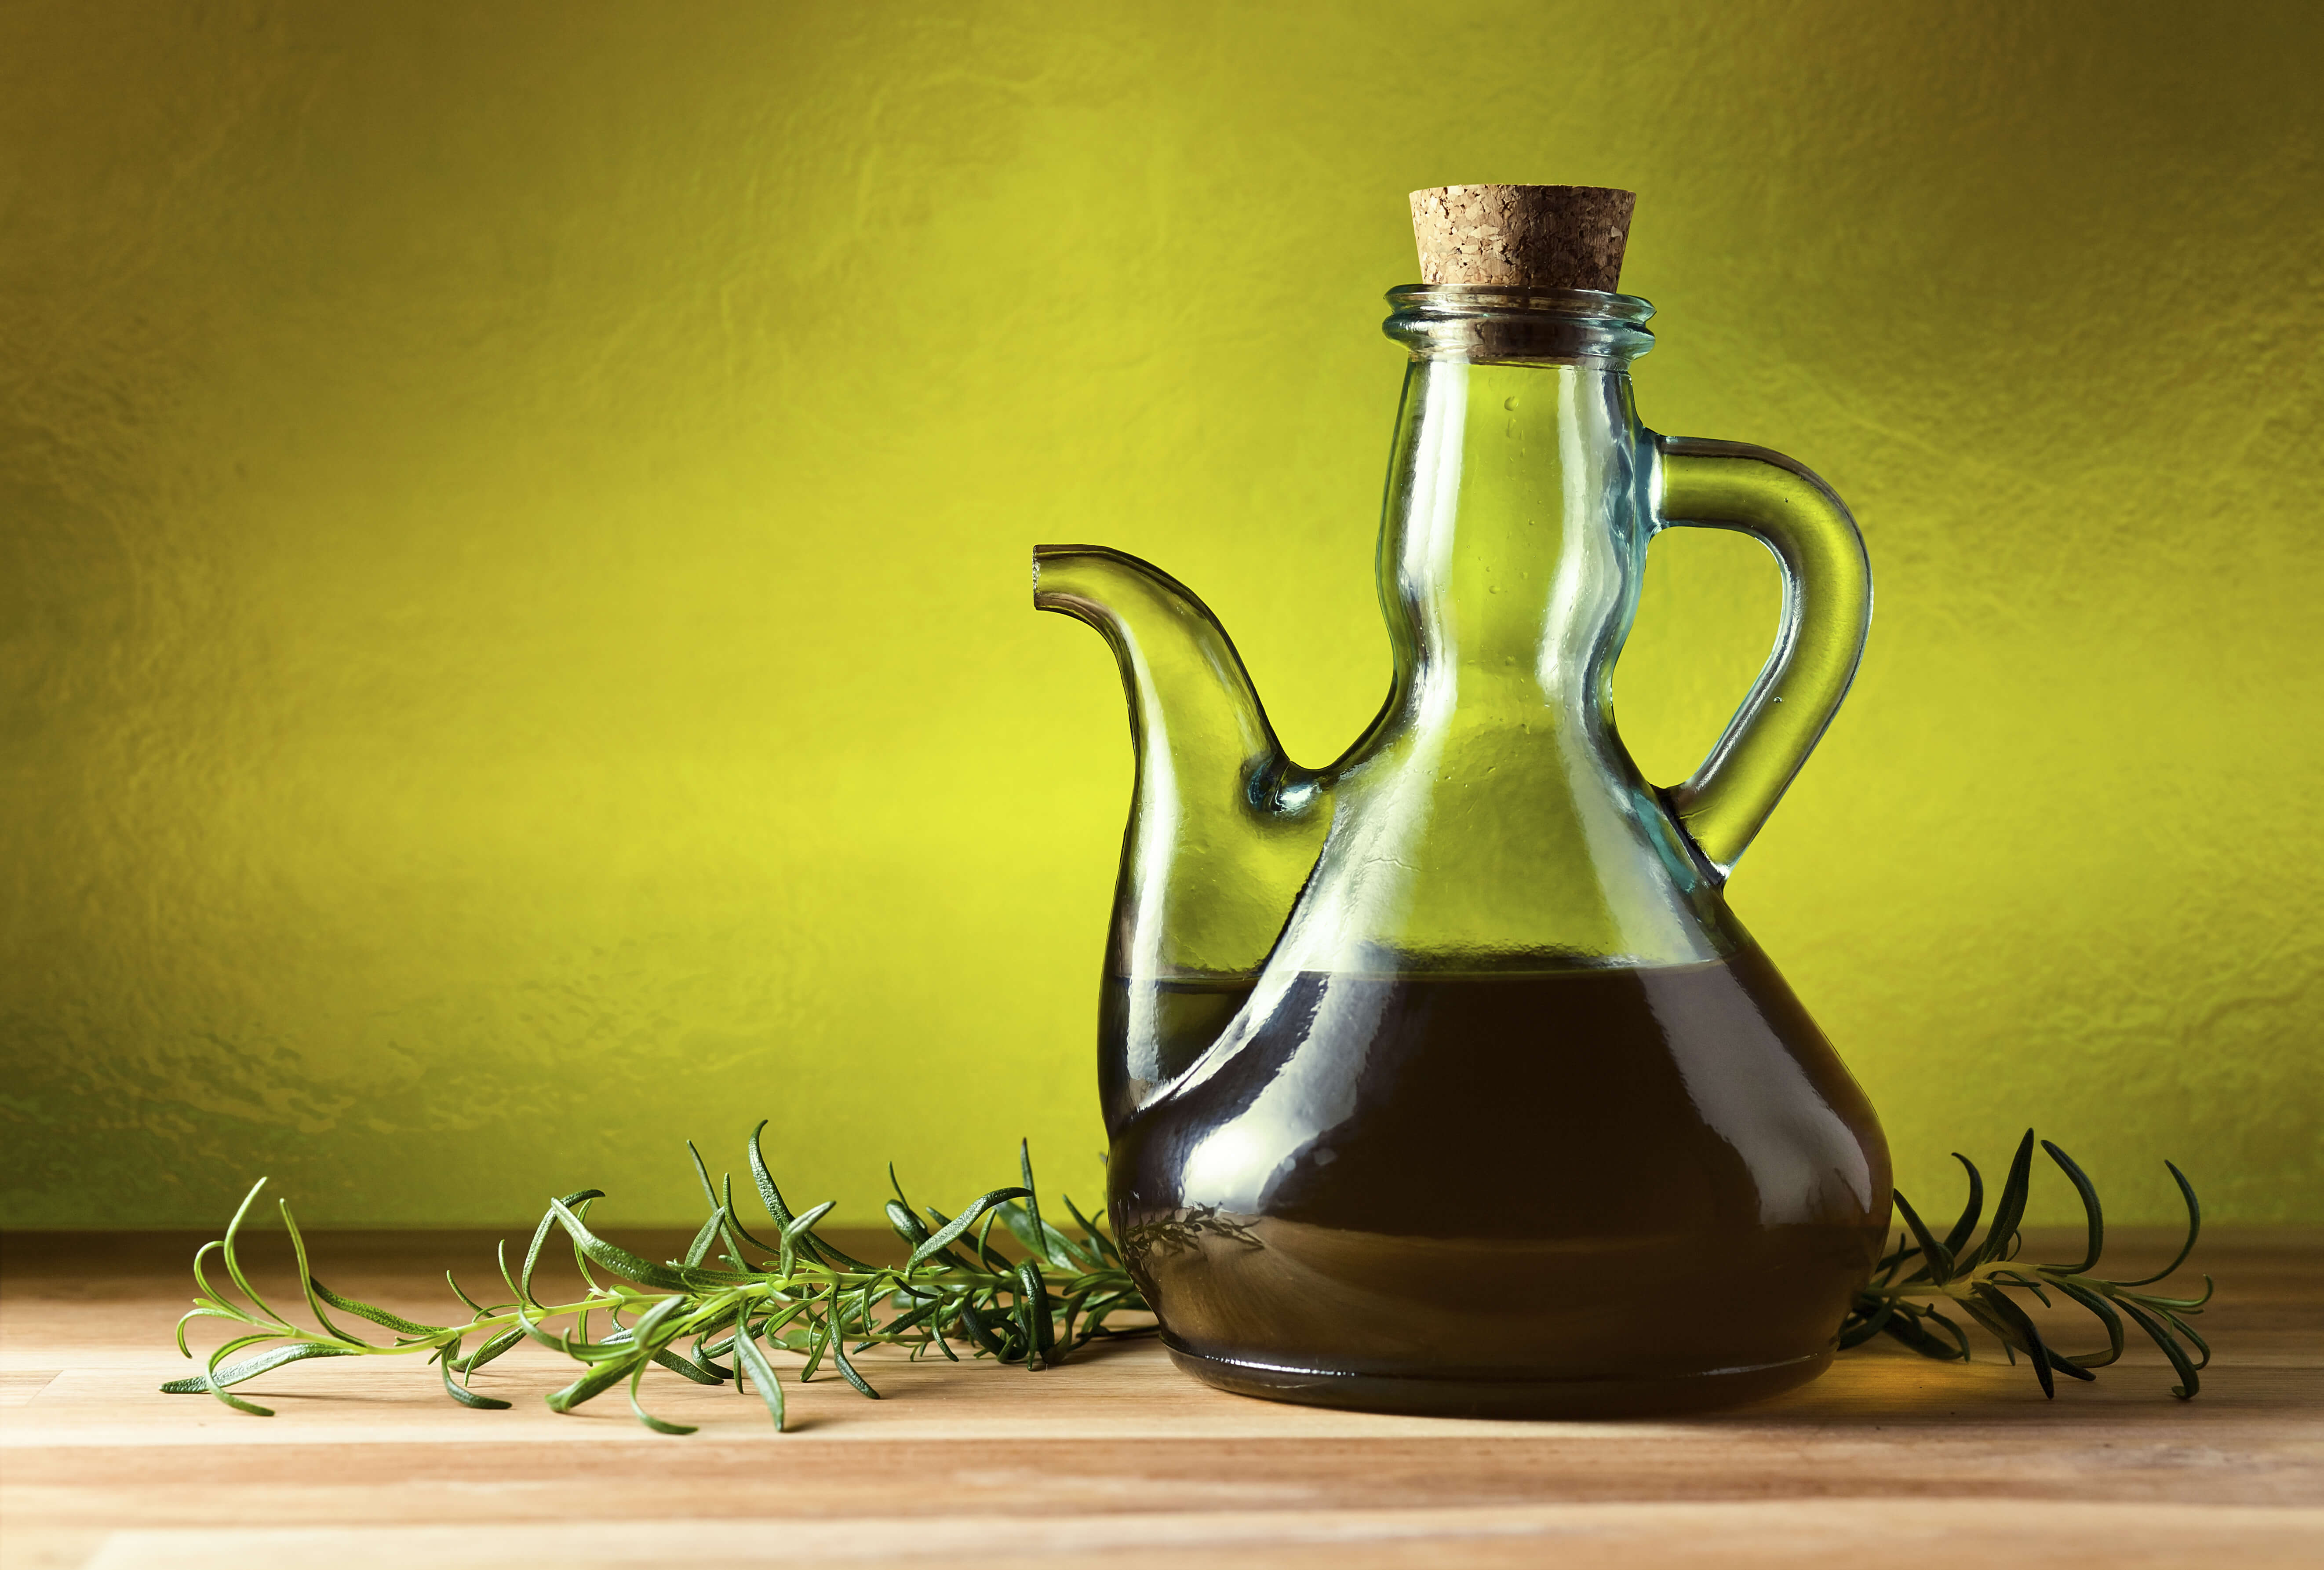 Infused olive oil can be great for party favors and gift ideas.